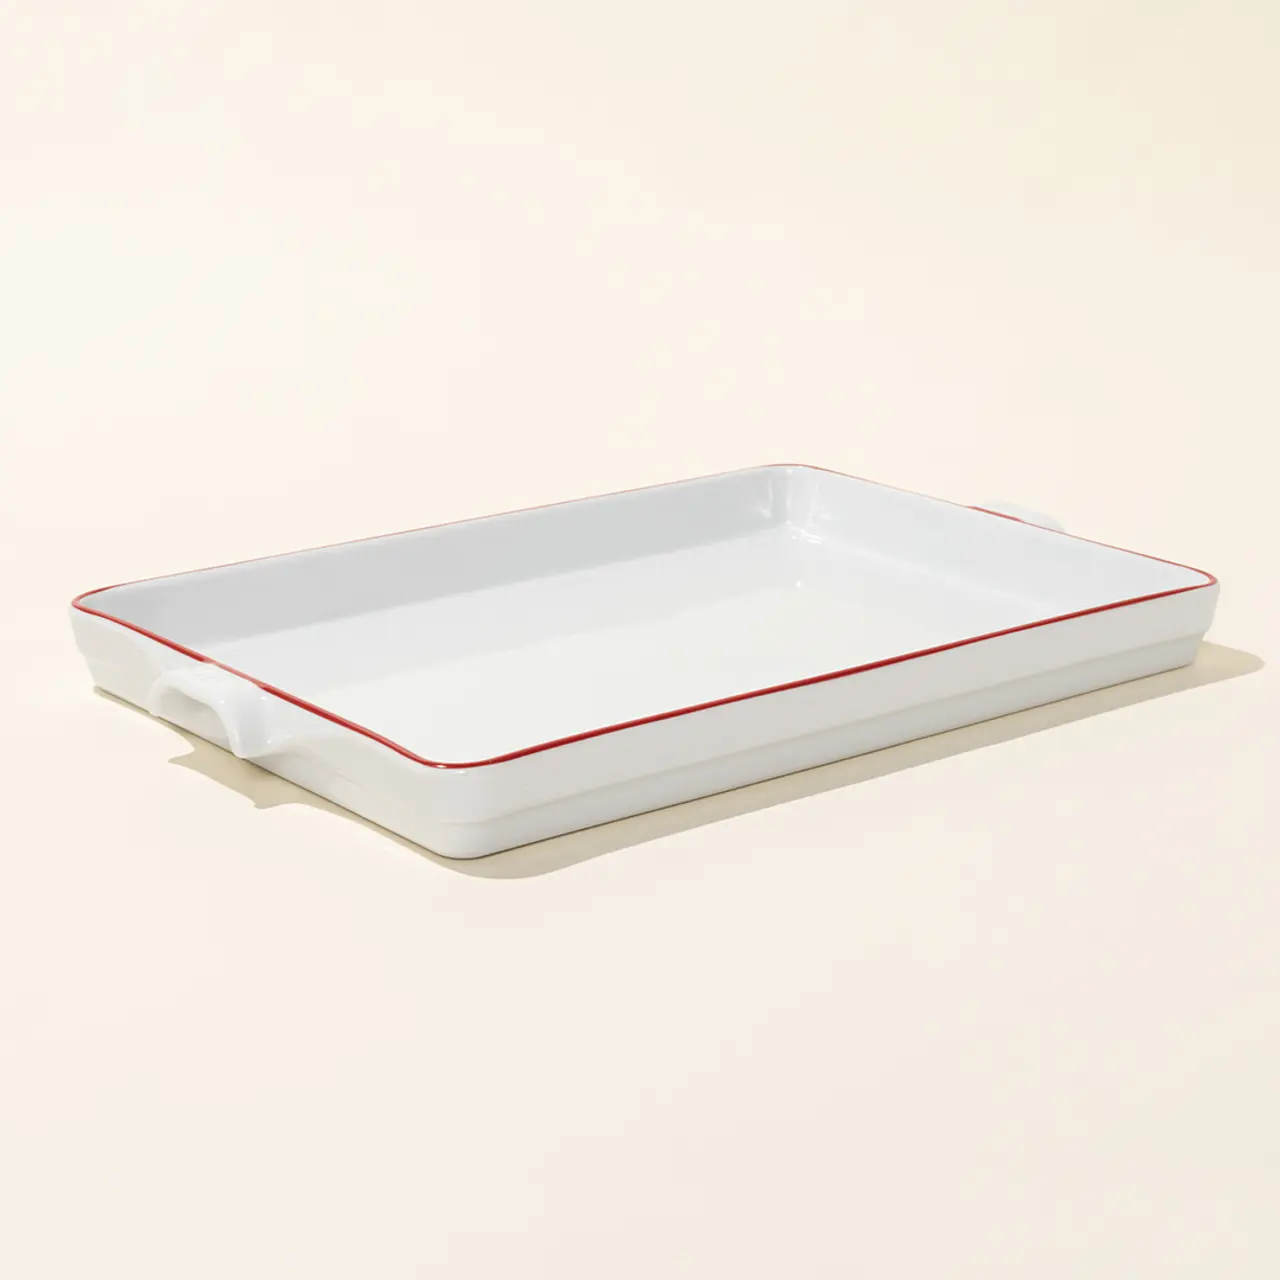 A white ceramic baking dish with red trim sits on a neutral background.